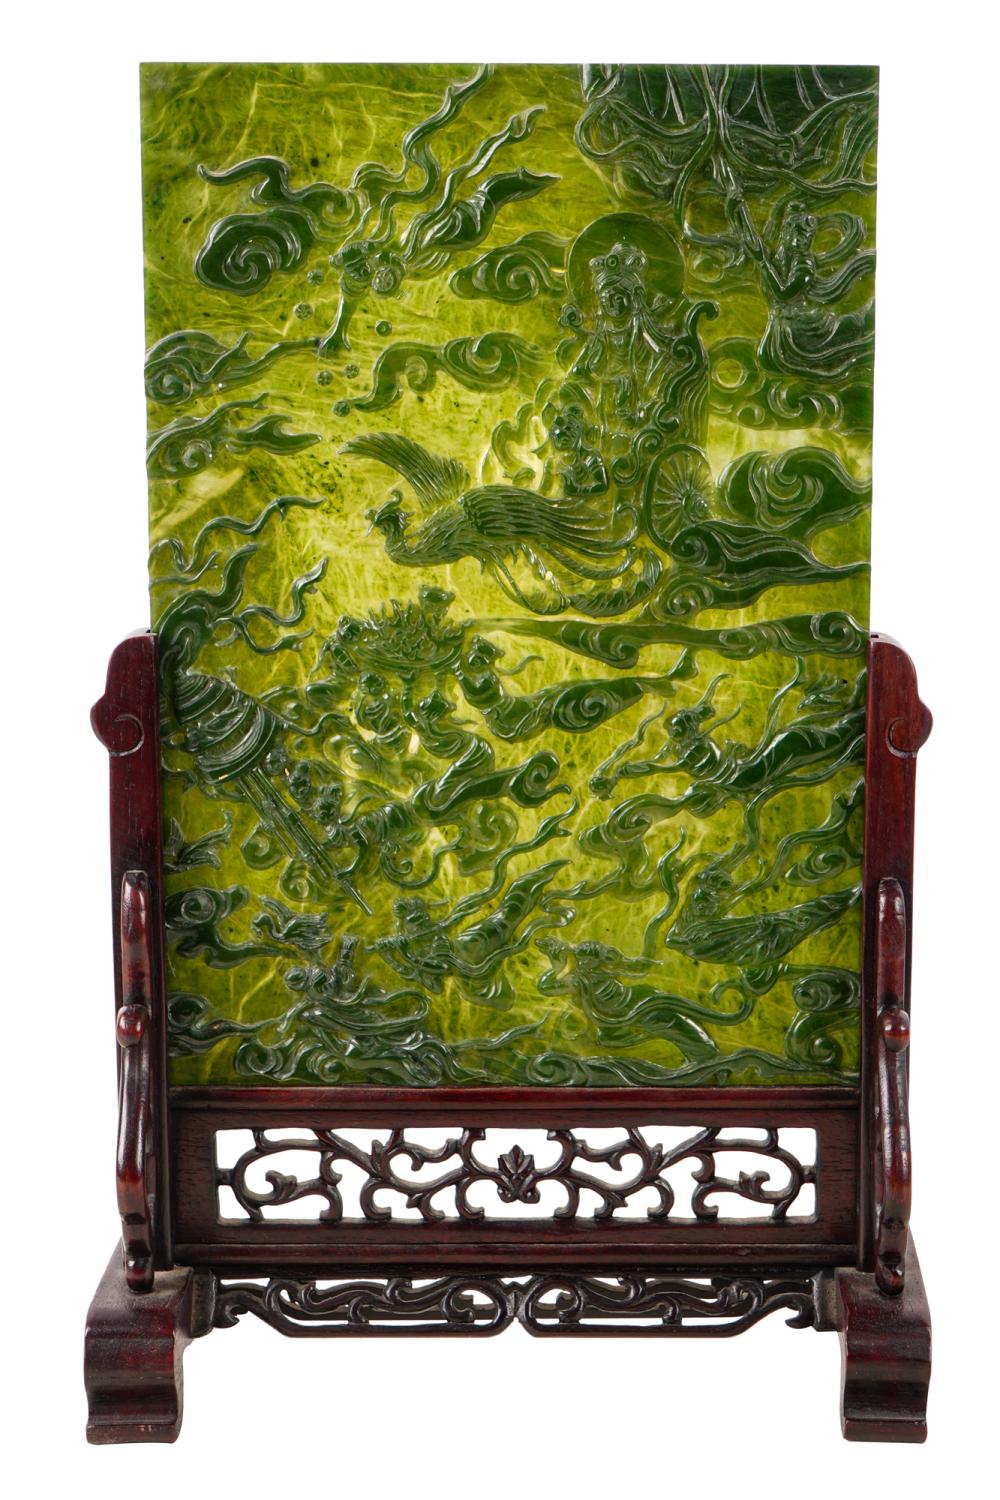 CHINESE JADE TABLE SCREENset in